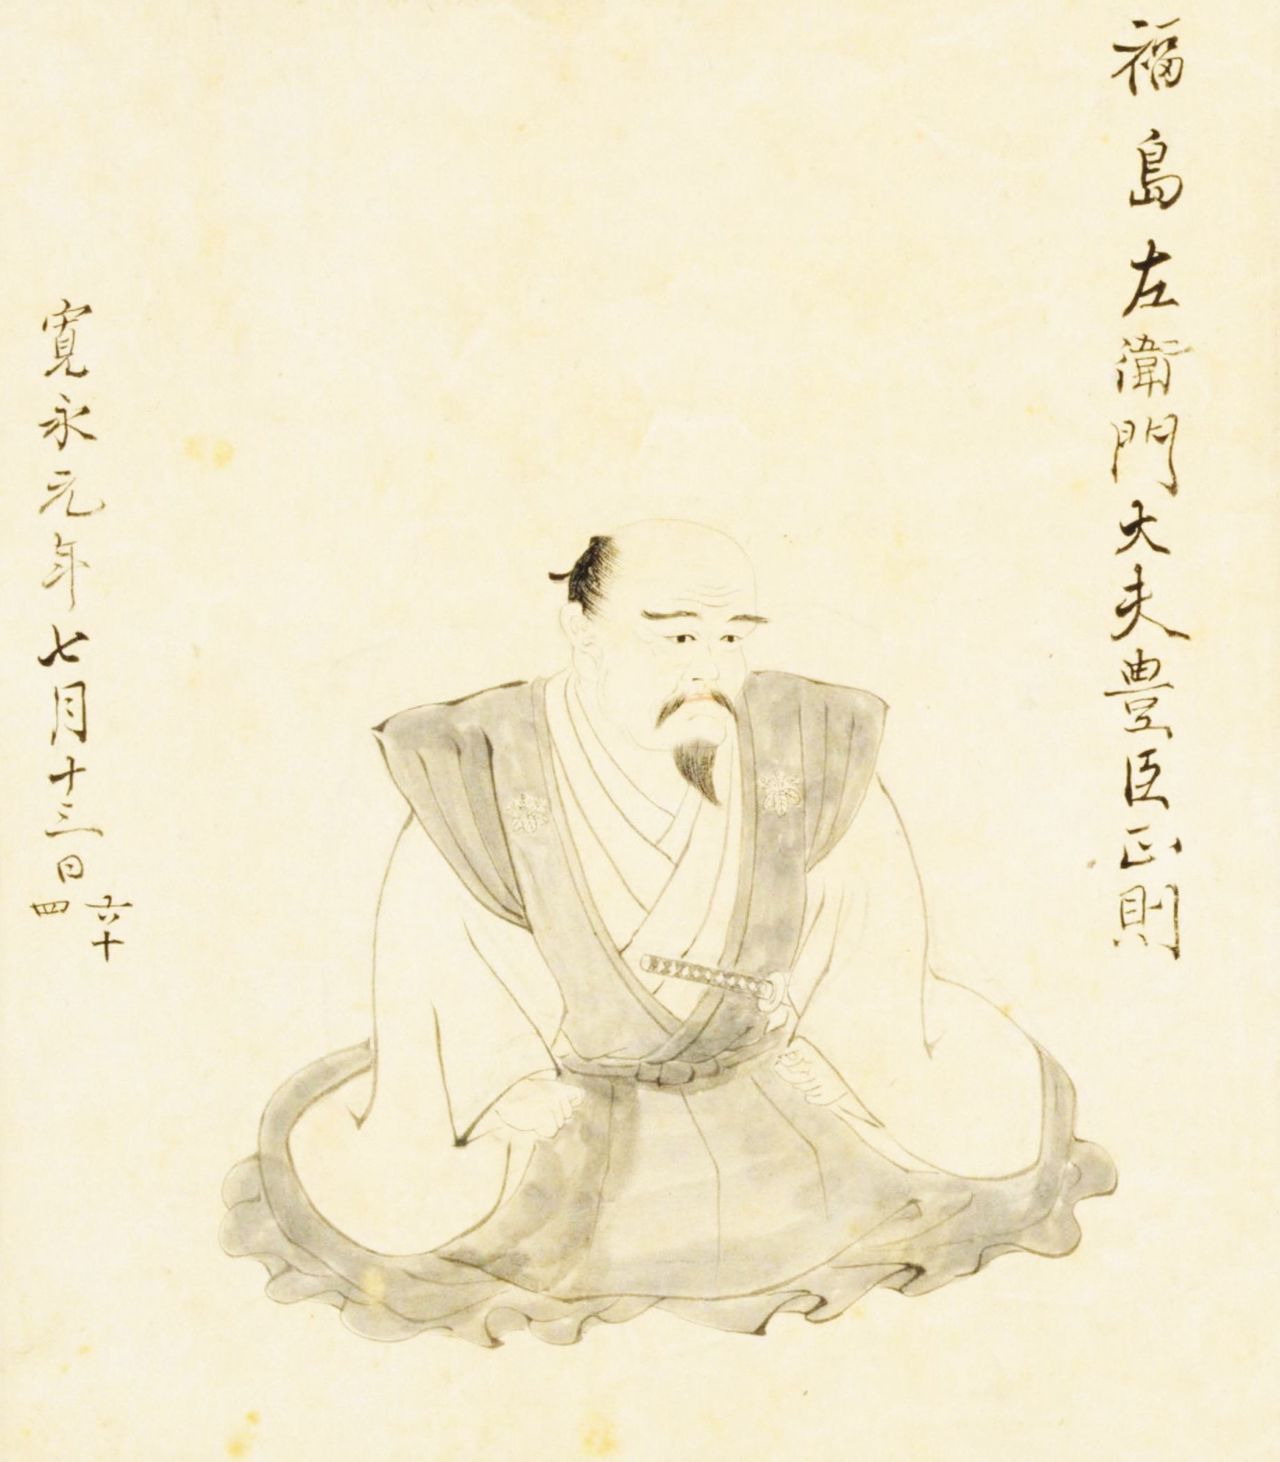 A nineteenth-century portrait of Fukushima Masanori by Kurihara Nobumitsu. Although a retainer of the Toyotomi clan, with the death of Hideyoshi he became an ally of Ieyasu and fought in the front line at the Battle of Sekigahara. (Courtesy National Diet Library)